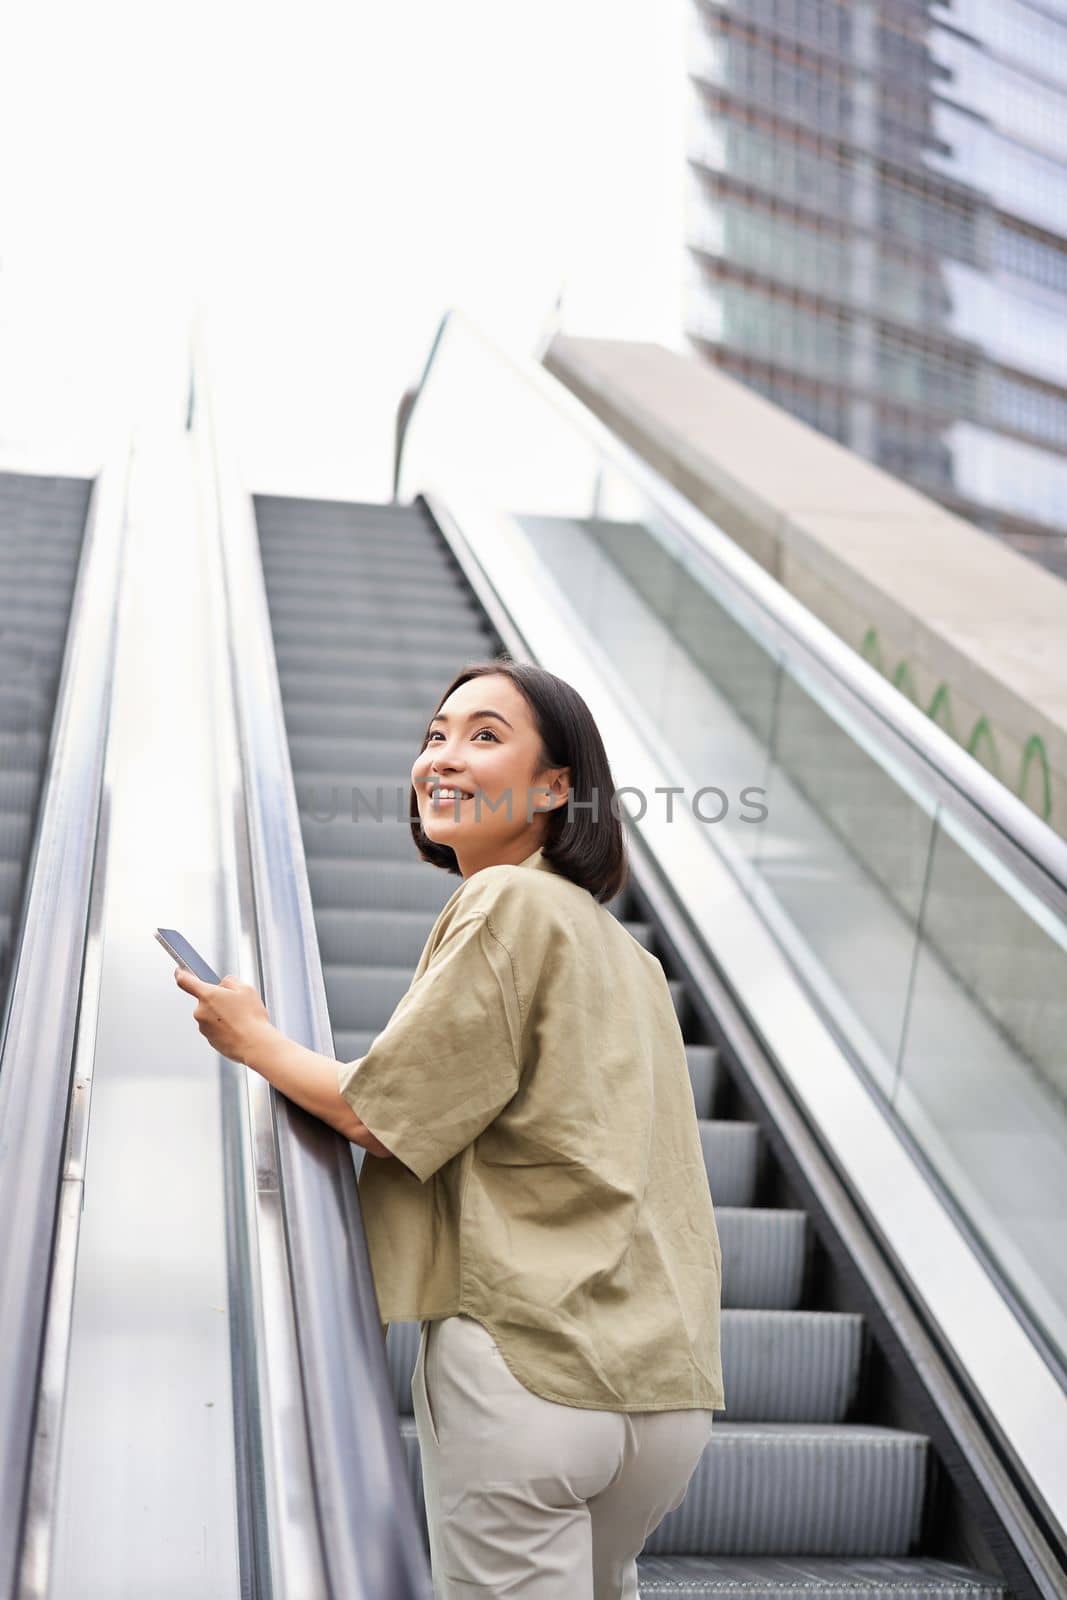 Young asian girl going up on an escalator, holding smartphone, smiling while walking in city. Copy space